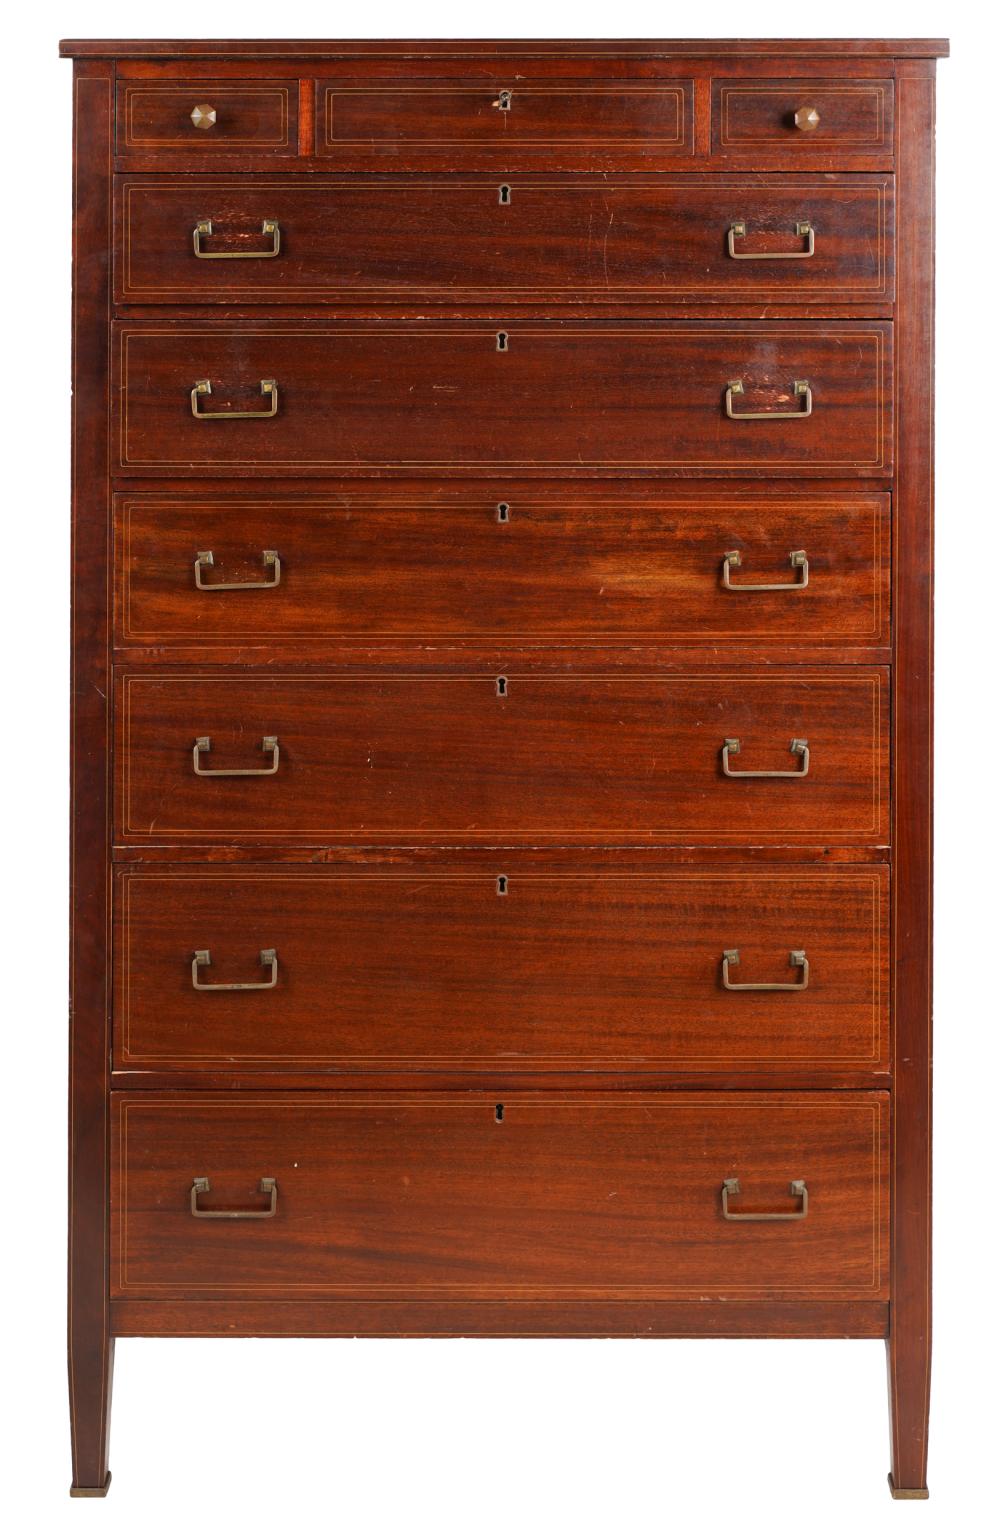 MAHOGANY TALL CHEST OF DRAWERSthe 33011e